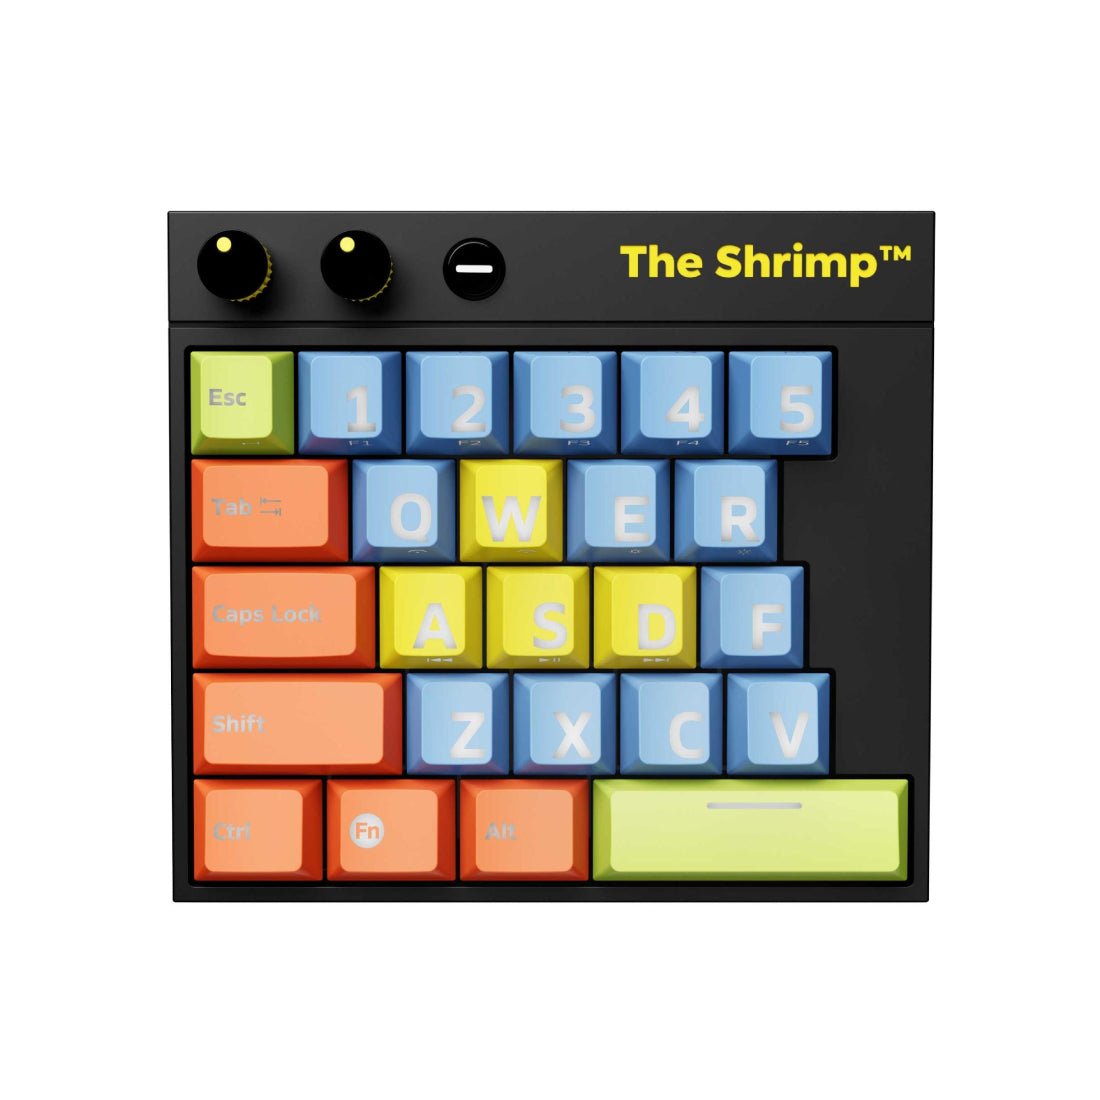 The Shrimp Ultracompact Mechanical Gaming Keyboard - Bomber - لوحة مفاتيح - Store 974 | ستور ٩٧٤